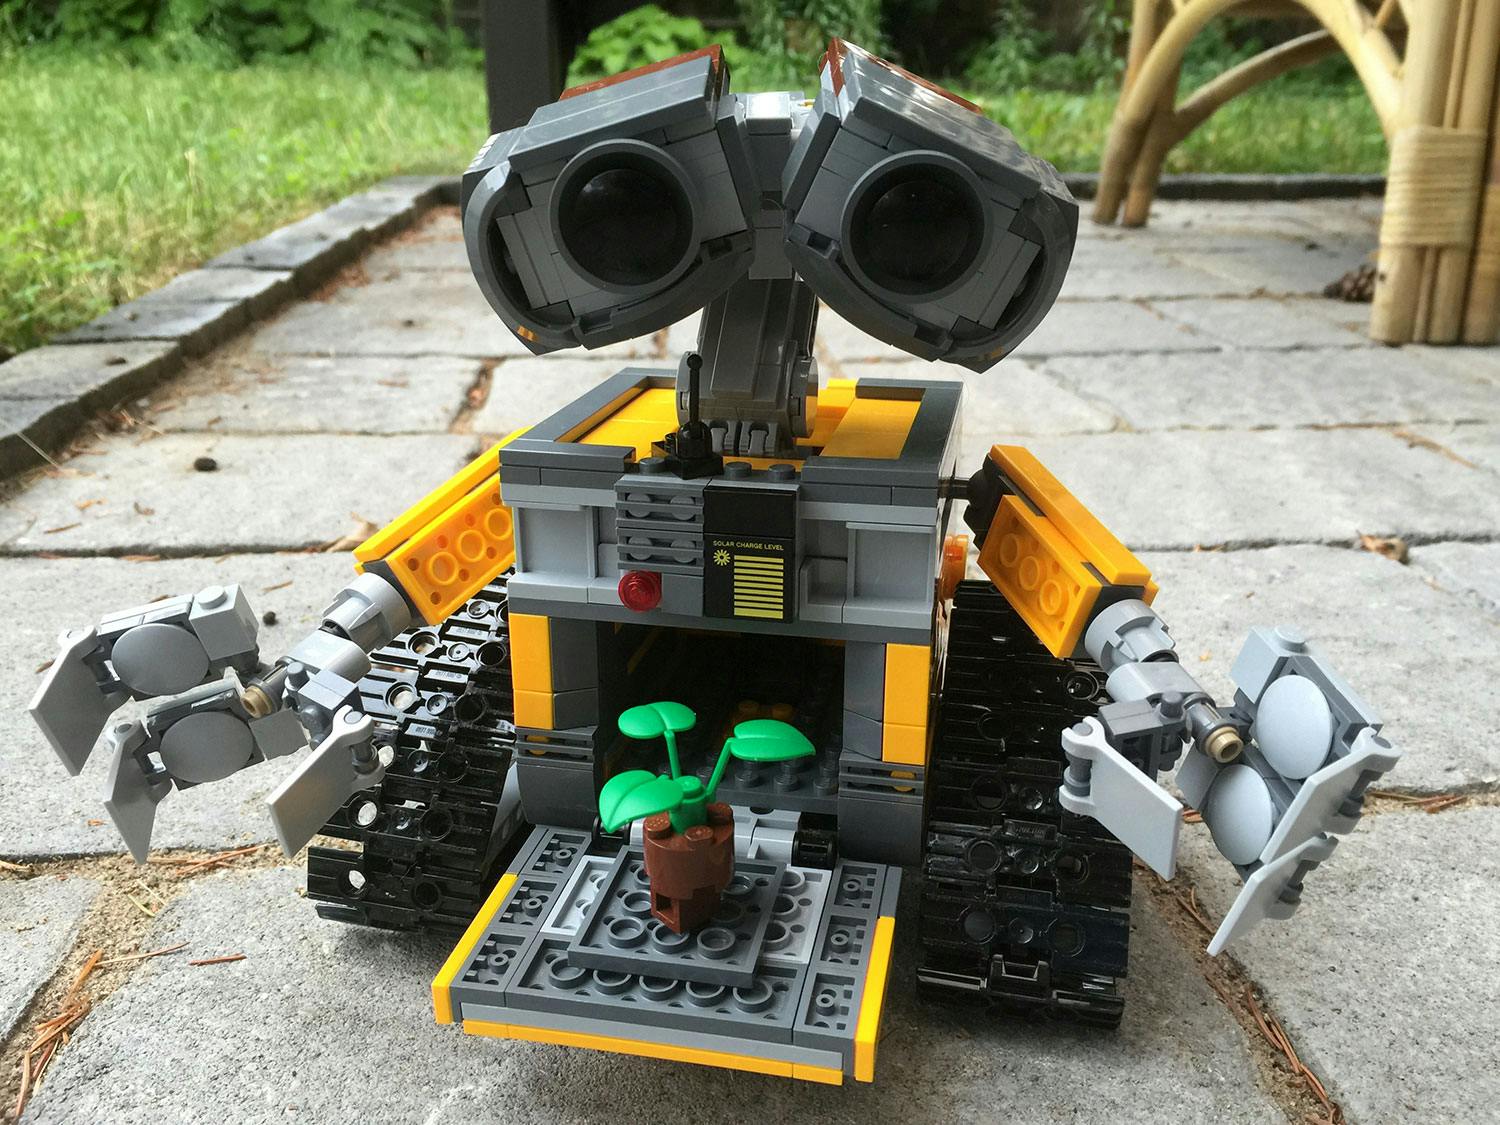 Here's your first look at Lego's new WALL-E set